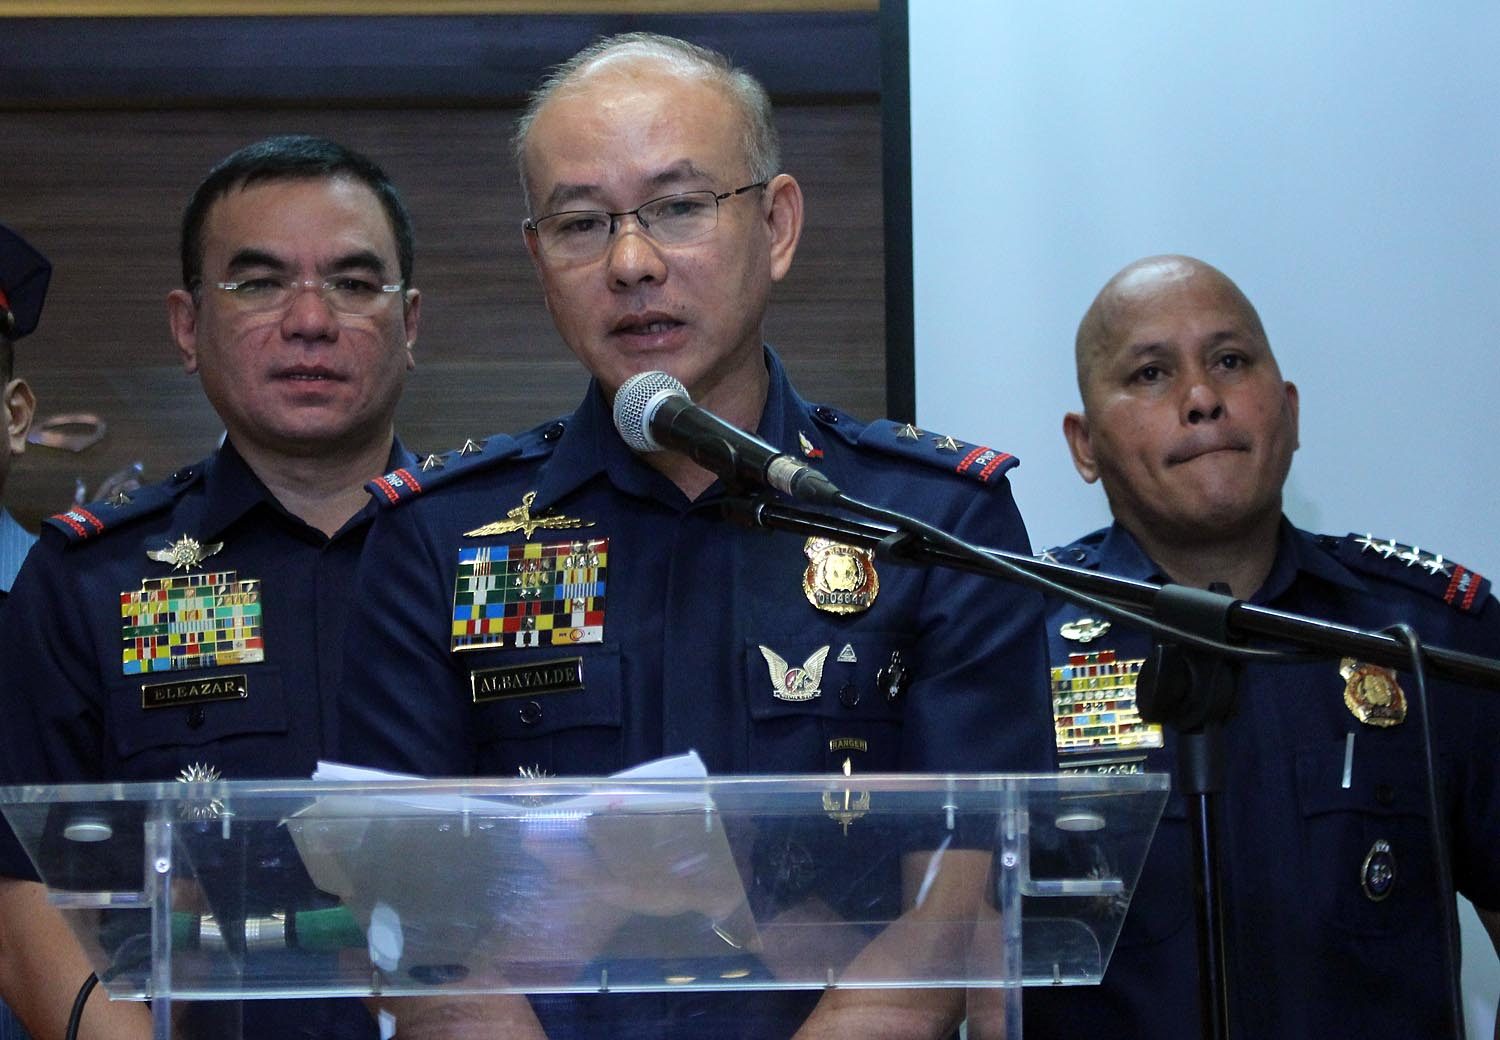 STRONG TIES. Former PNP chief Ronald dela Rosa (right), former NCRPO Director Oscar Albayalde (center) and former QCPD Director Guillermo Eleazar (left) during a press conference at Camp Crame. File photo by Darren Langit/Rappler 